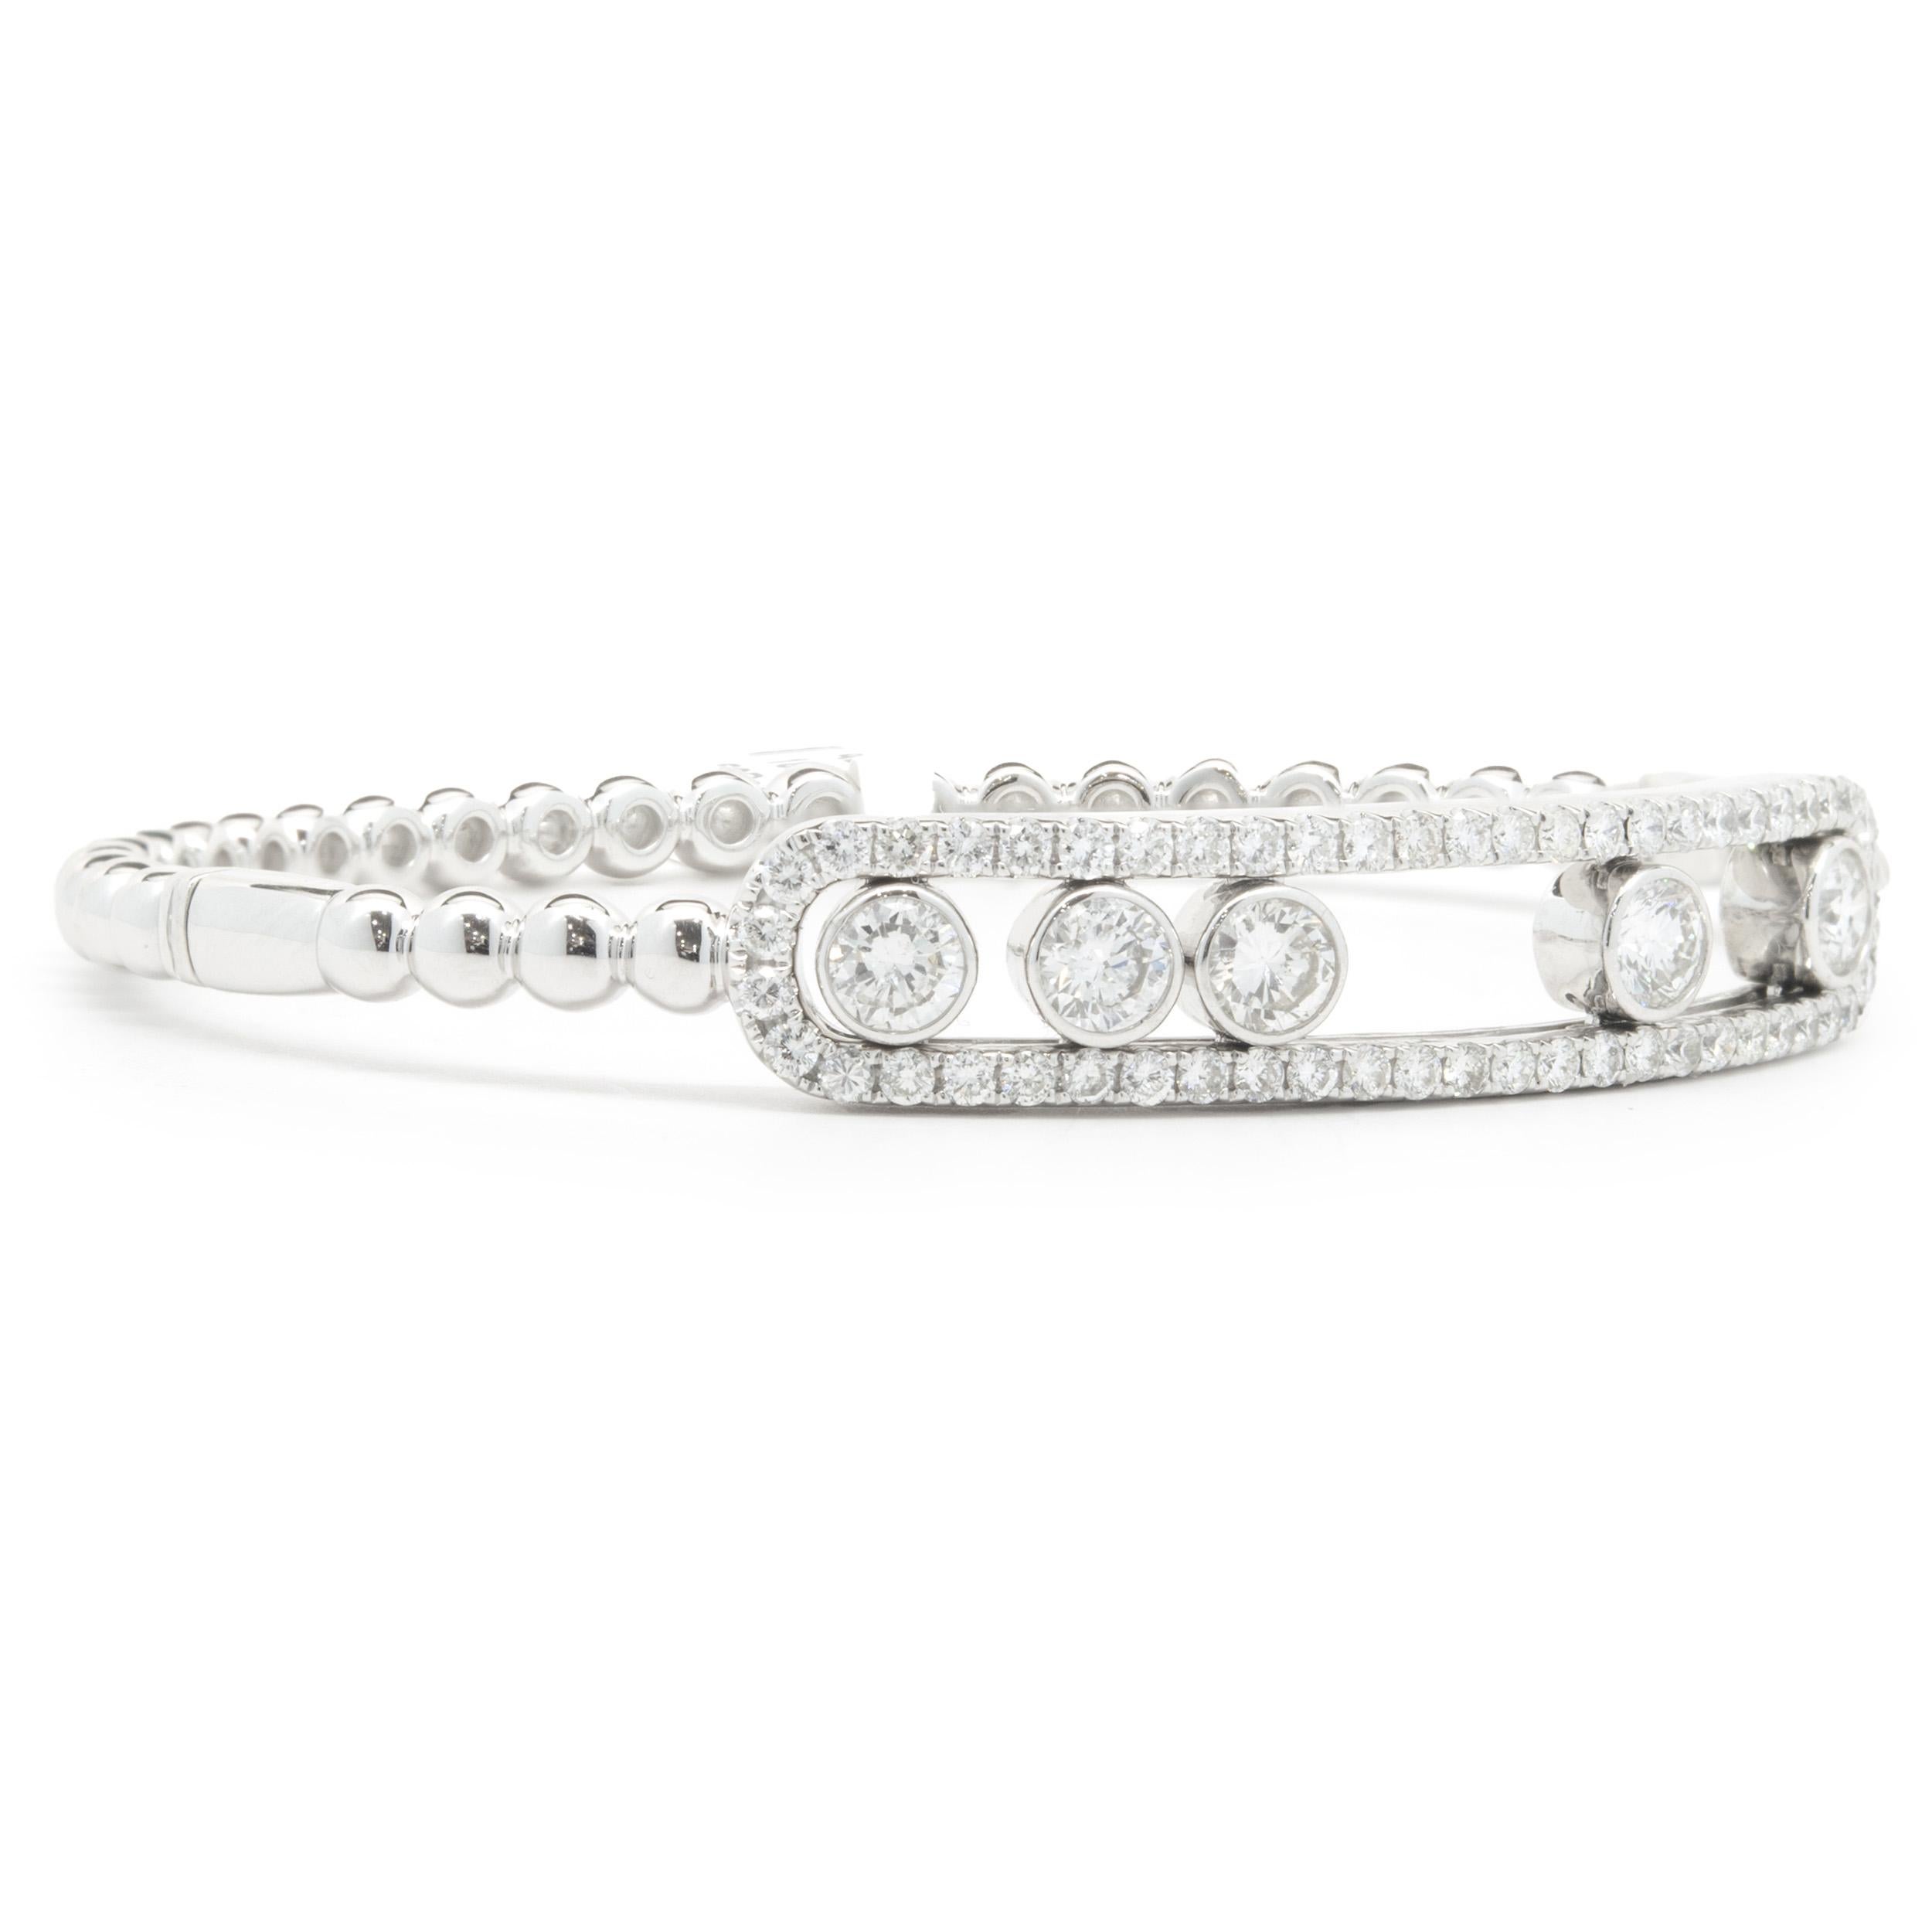 Designer: custom
Material: 18K white gold
Diamonds: 59 round brilliant cut = 2.25cttw
Color: F / G
Clarity: VS1-2
Dimensions: bracelet will fit up to a 7.5-inch wrist
Weight: 21.51 grams